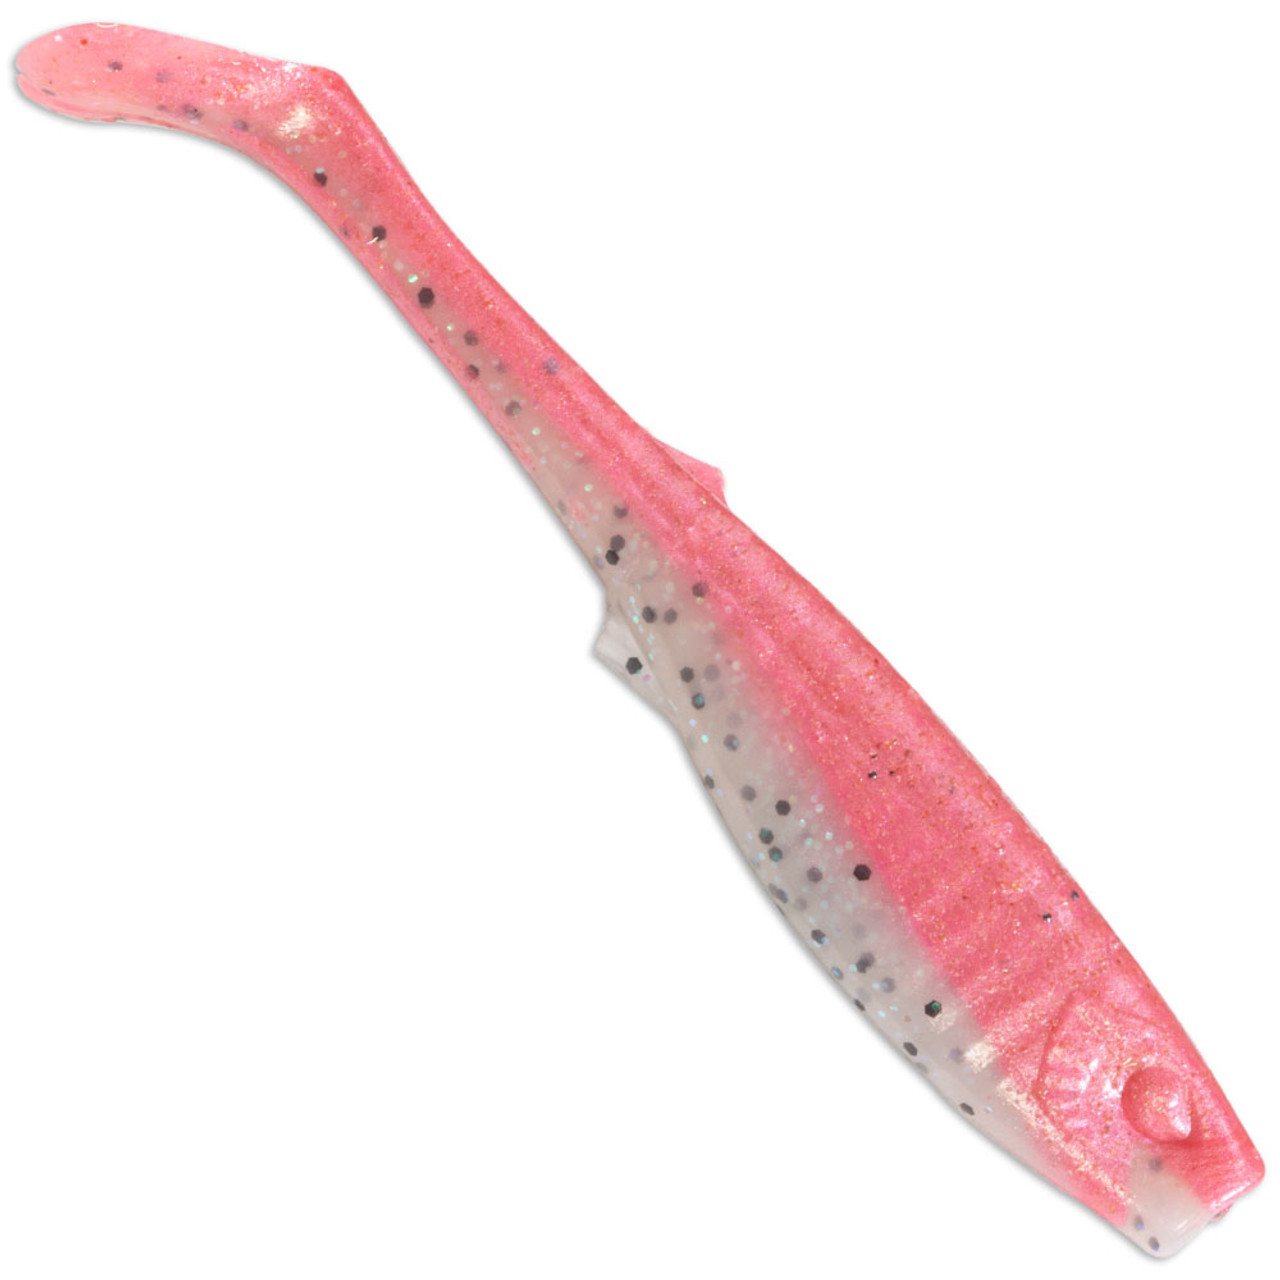 https://cdn11.bigcommerce.com/s-55834/images/stencil/1280x1280/products/5007/18253/gulp-paddle-shad-pink-belly-shrimp__15753.1601637568.jpg?c=2